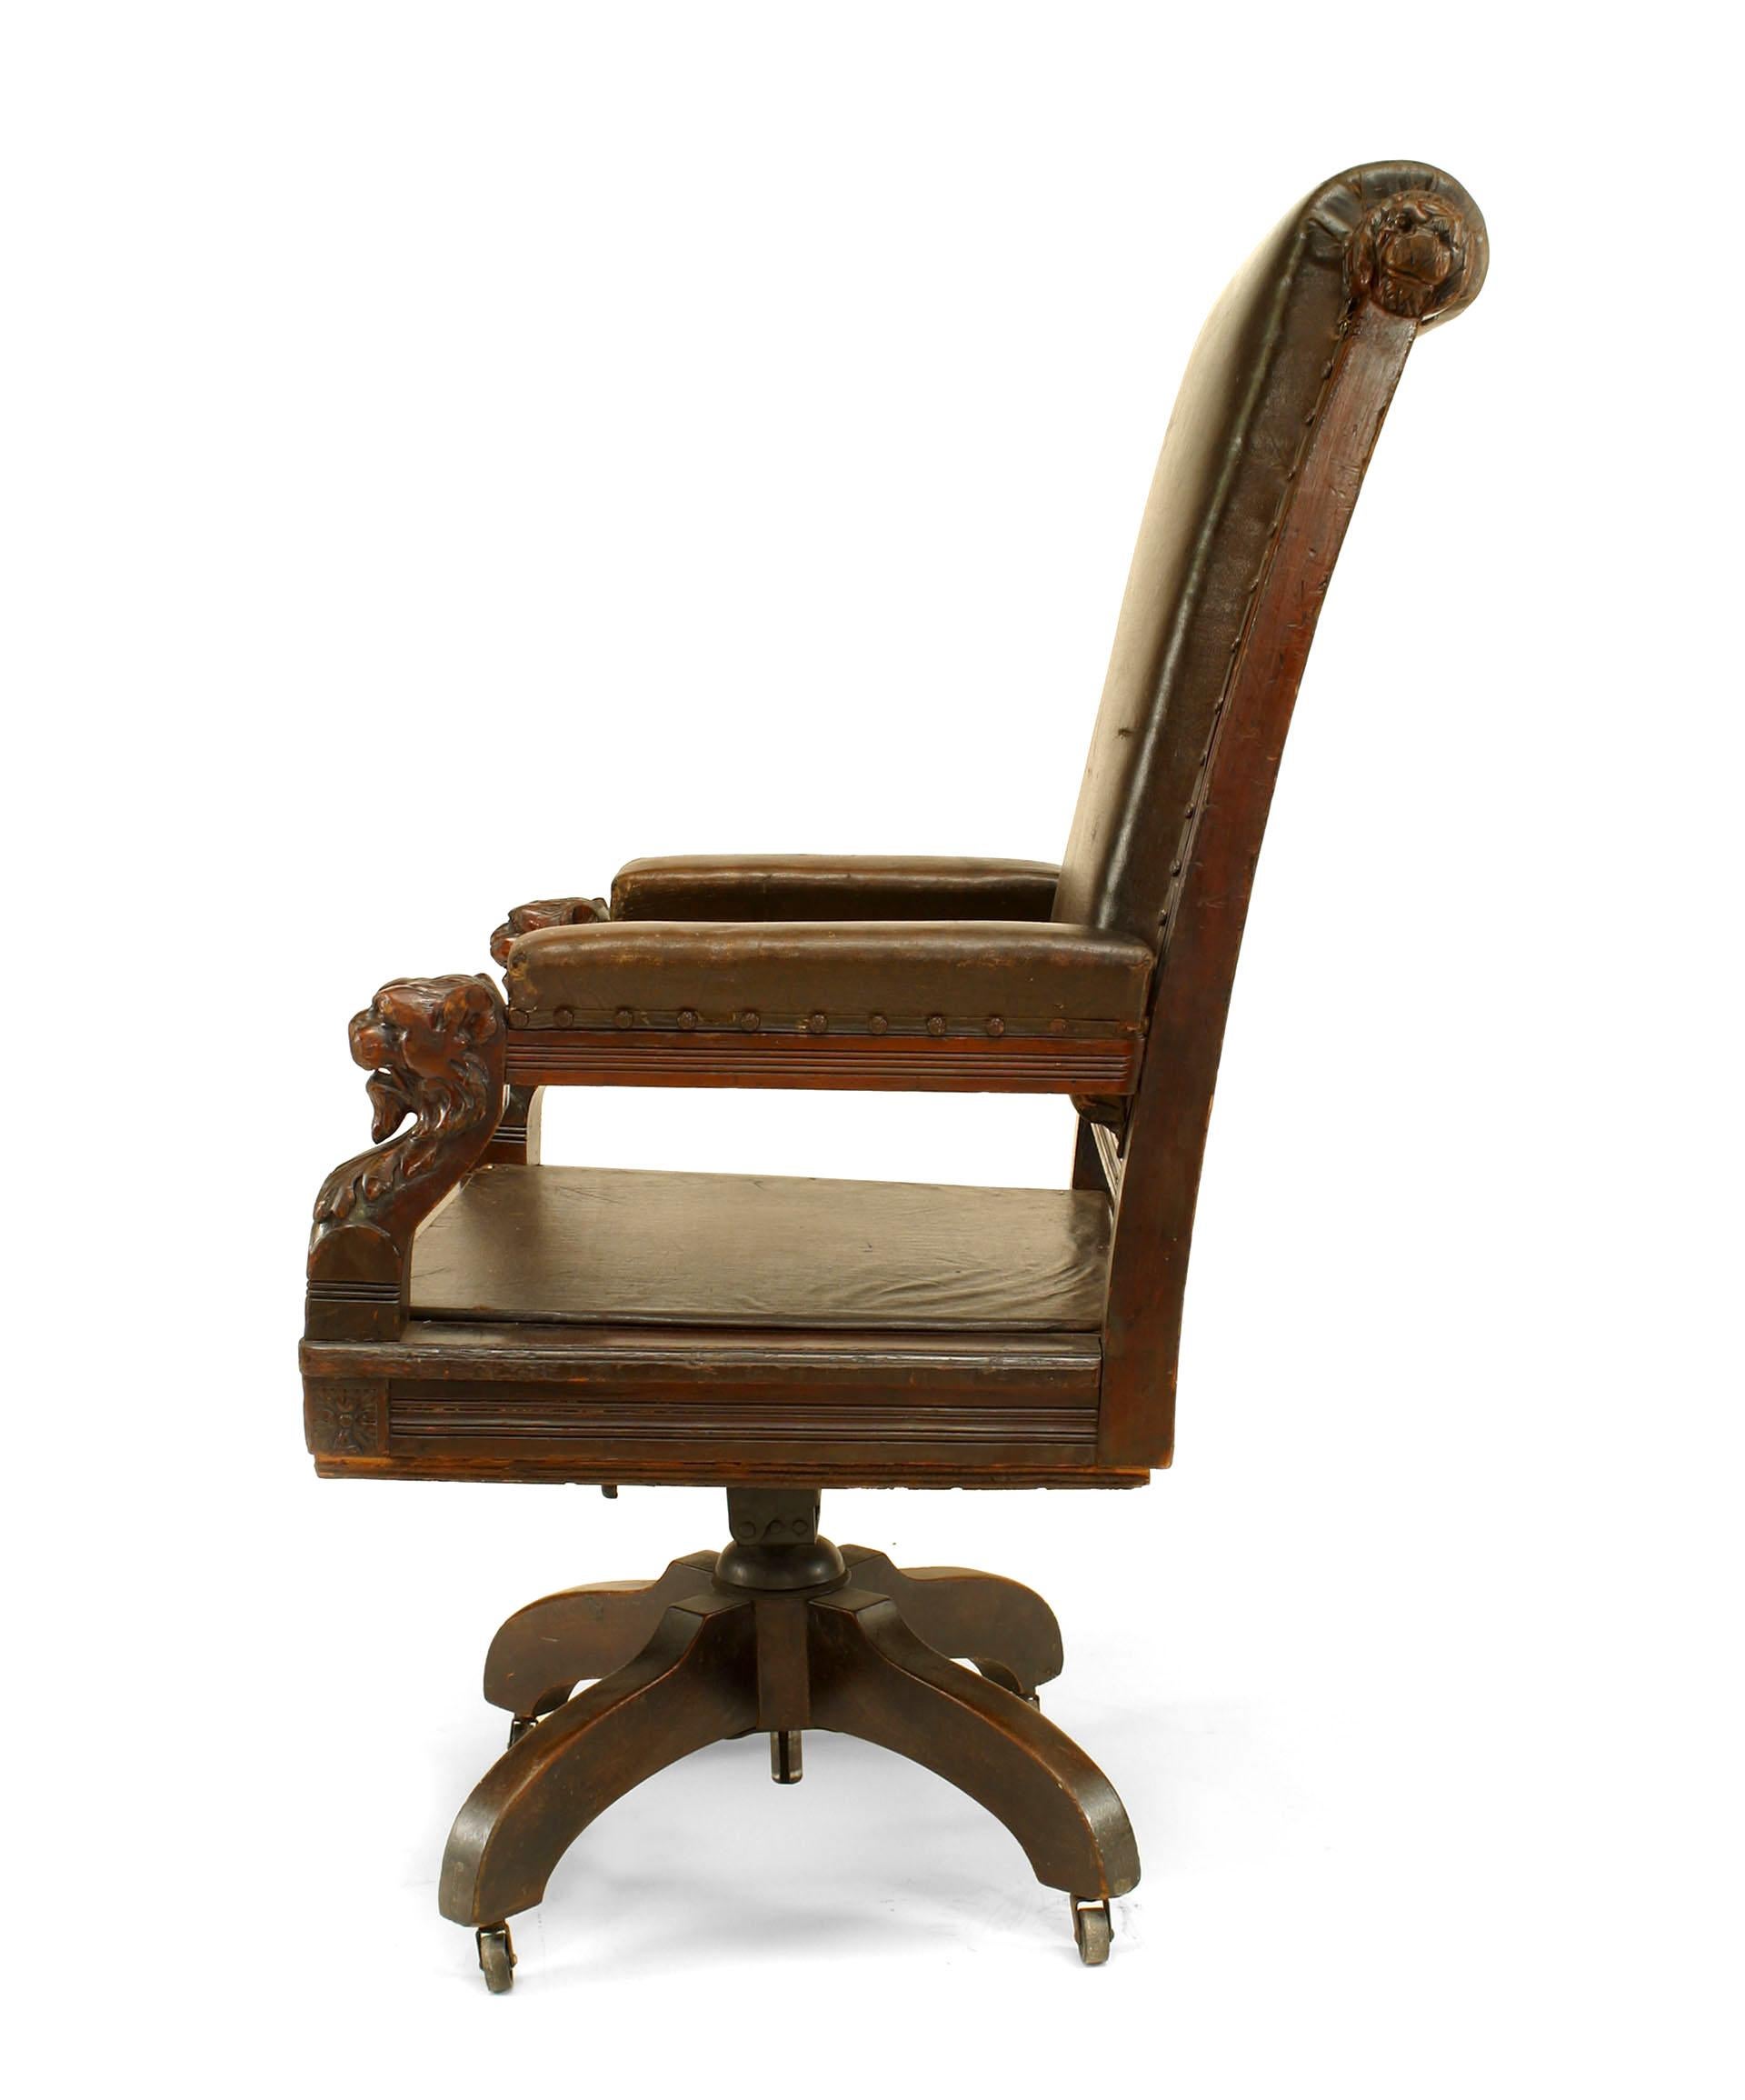 English Victorian high back brown leather judges swivel chair with carved lion heads on arms.
 